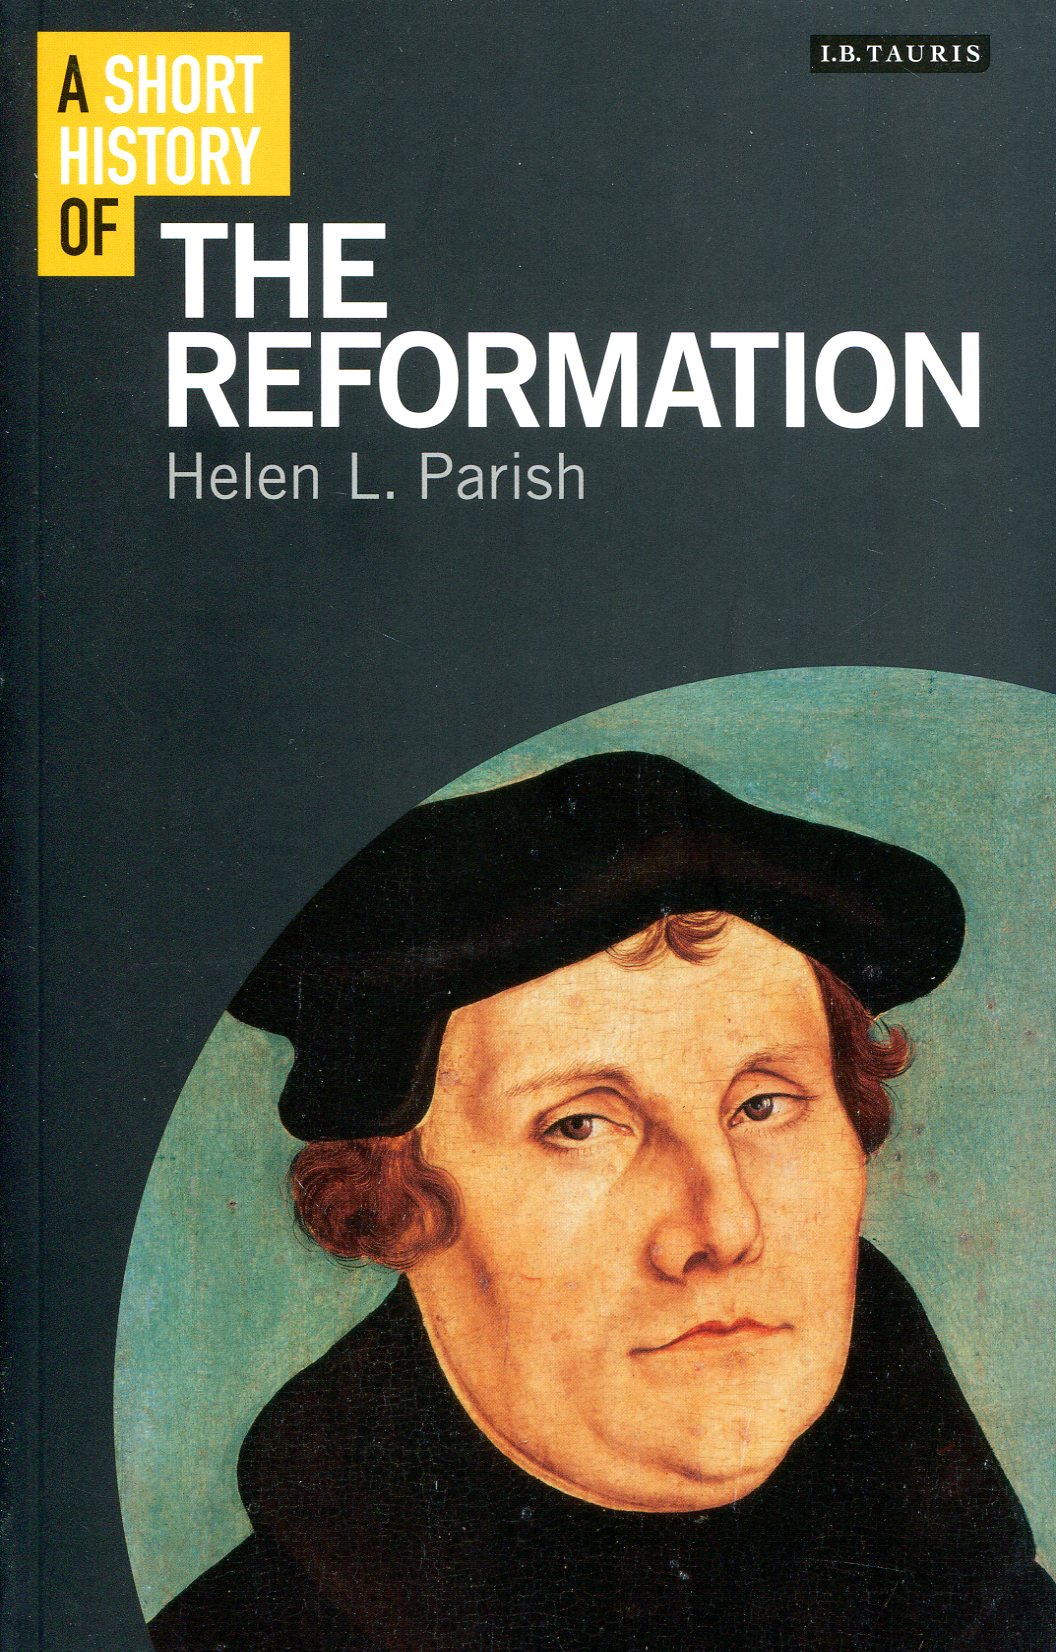 A short history of the Reformation